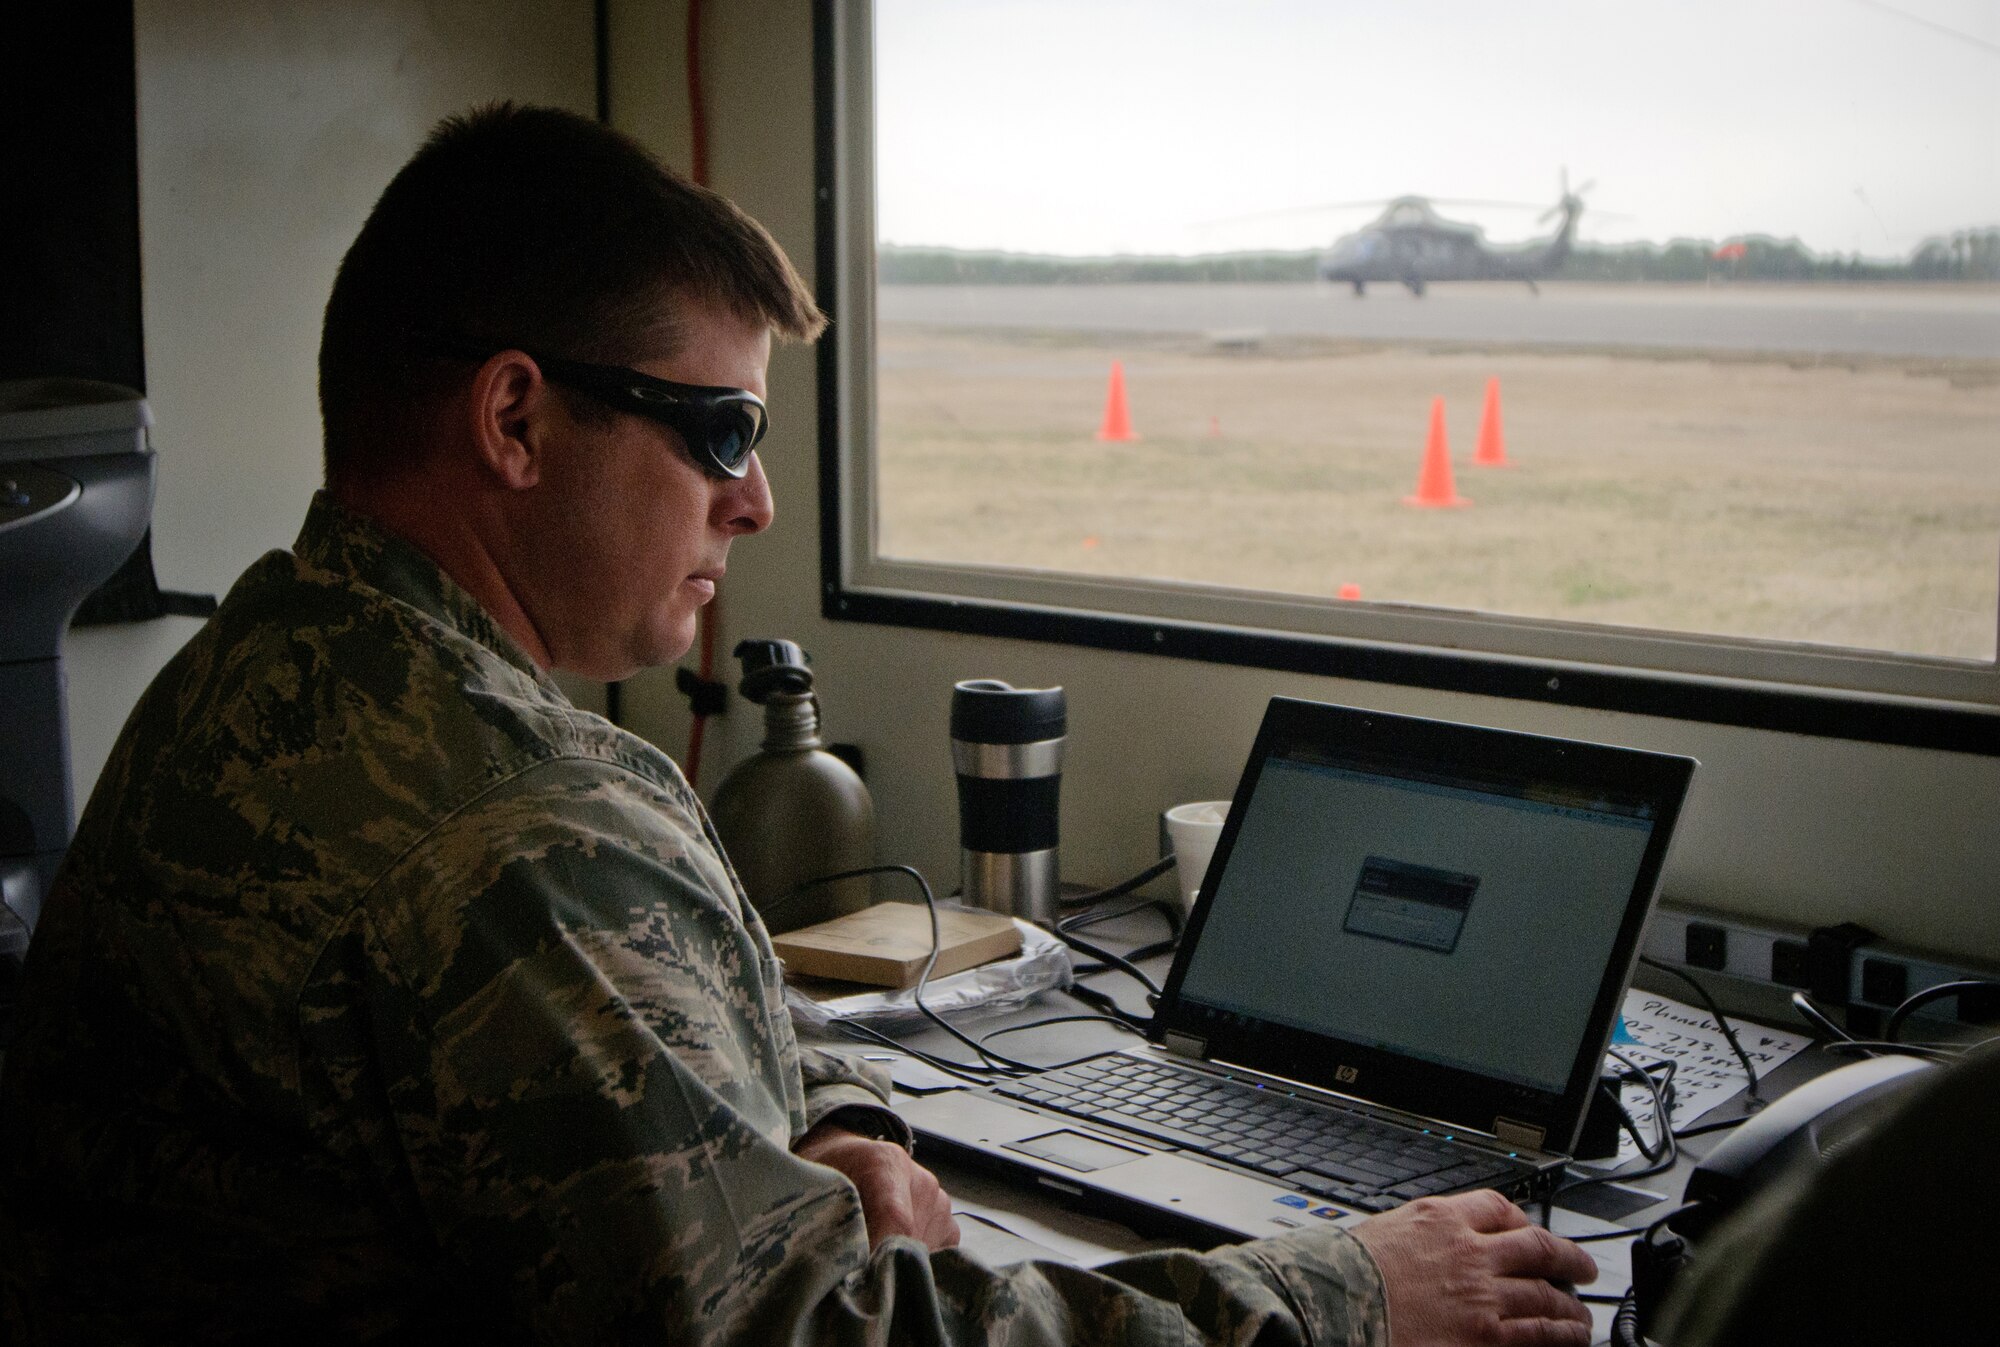 Maj. Ash Groves, air operations officer for the Kentucky Air National Guard's 123rd Contingency Response Group, monitors air traffic March 28, 2012, at Lakehurst Naval Air Engineering Station, N.J., while sitting in a Hard-sided Expandable Lightweight Air-Mobile Shelter. The HELAMS served as a Joint Operations Center for Army and Air Force personnel running a Joint Task Force-Port Opening as part of Eagle Flag, an exercise designed to test the ability of U.S. forces to operate in a deployed environment. (U.S. Air Force photo by Master Sgt. Phil Speck)